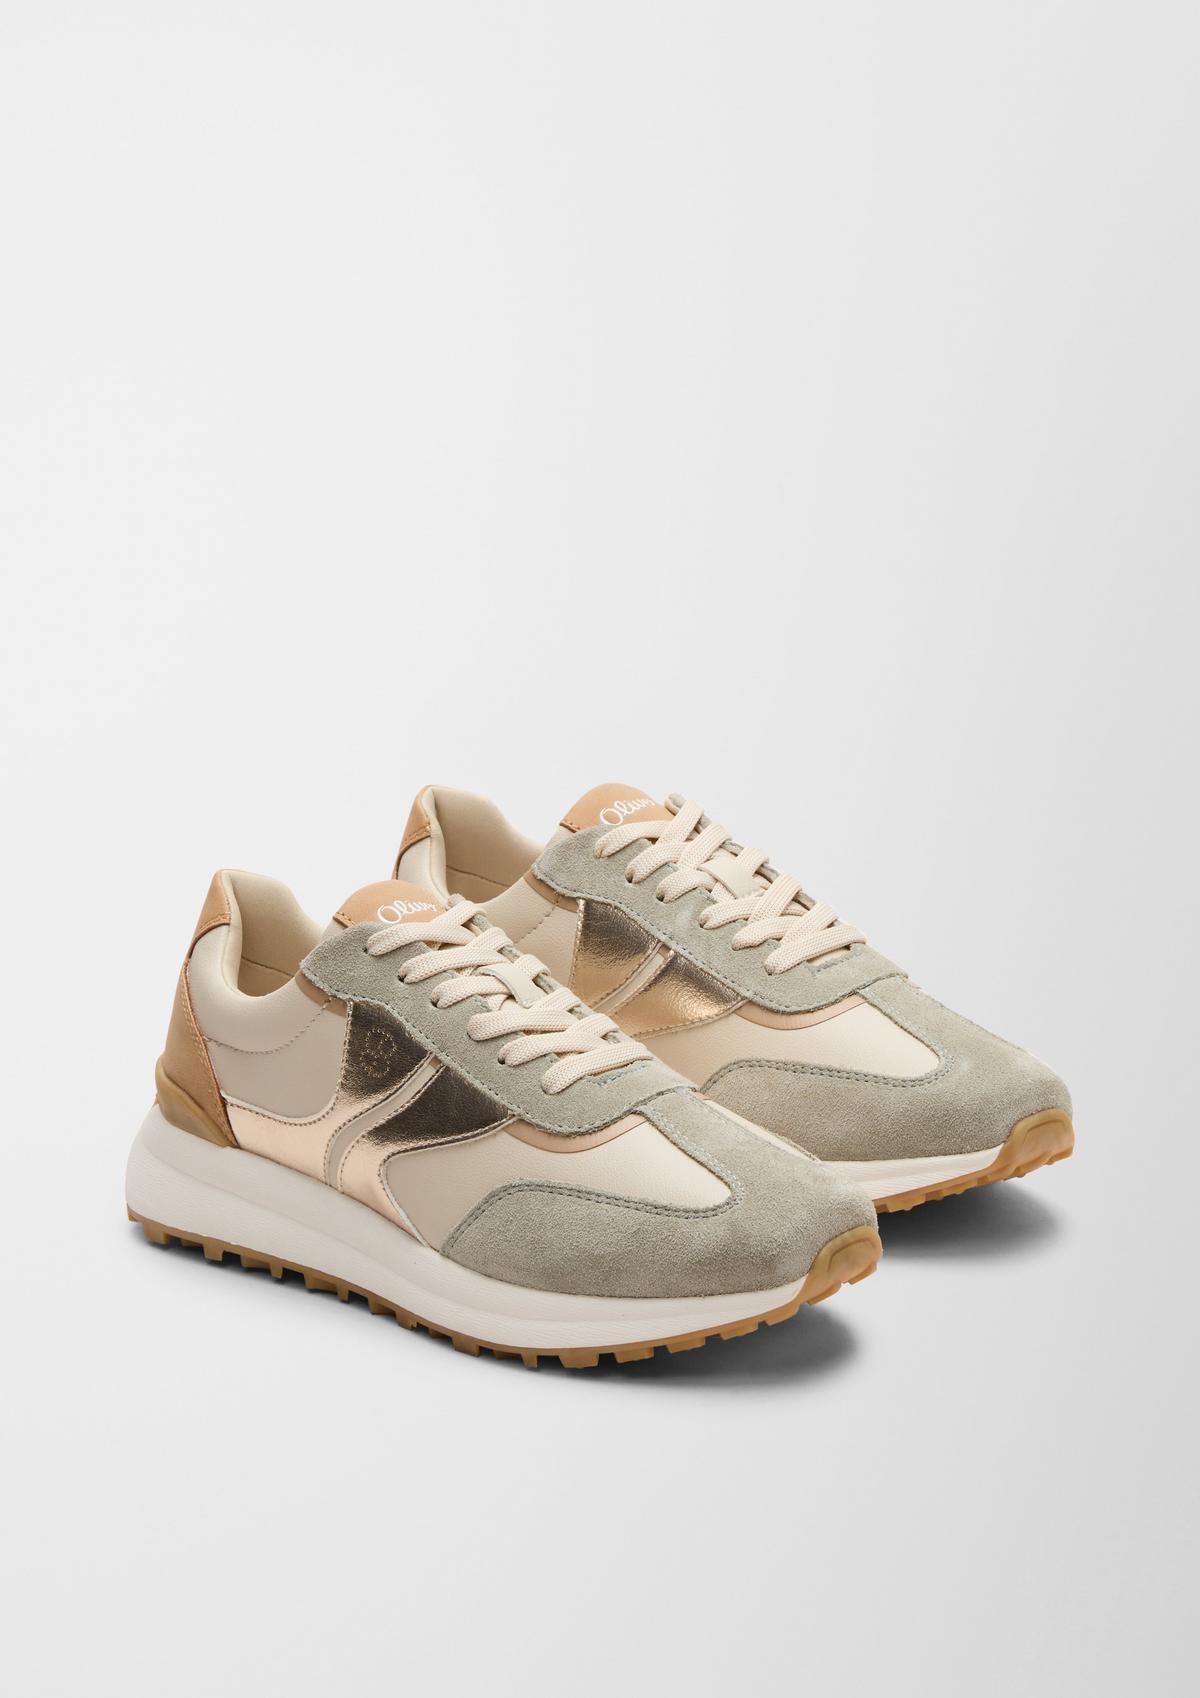 s.Oliver Sneaker mit Plateausohle